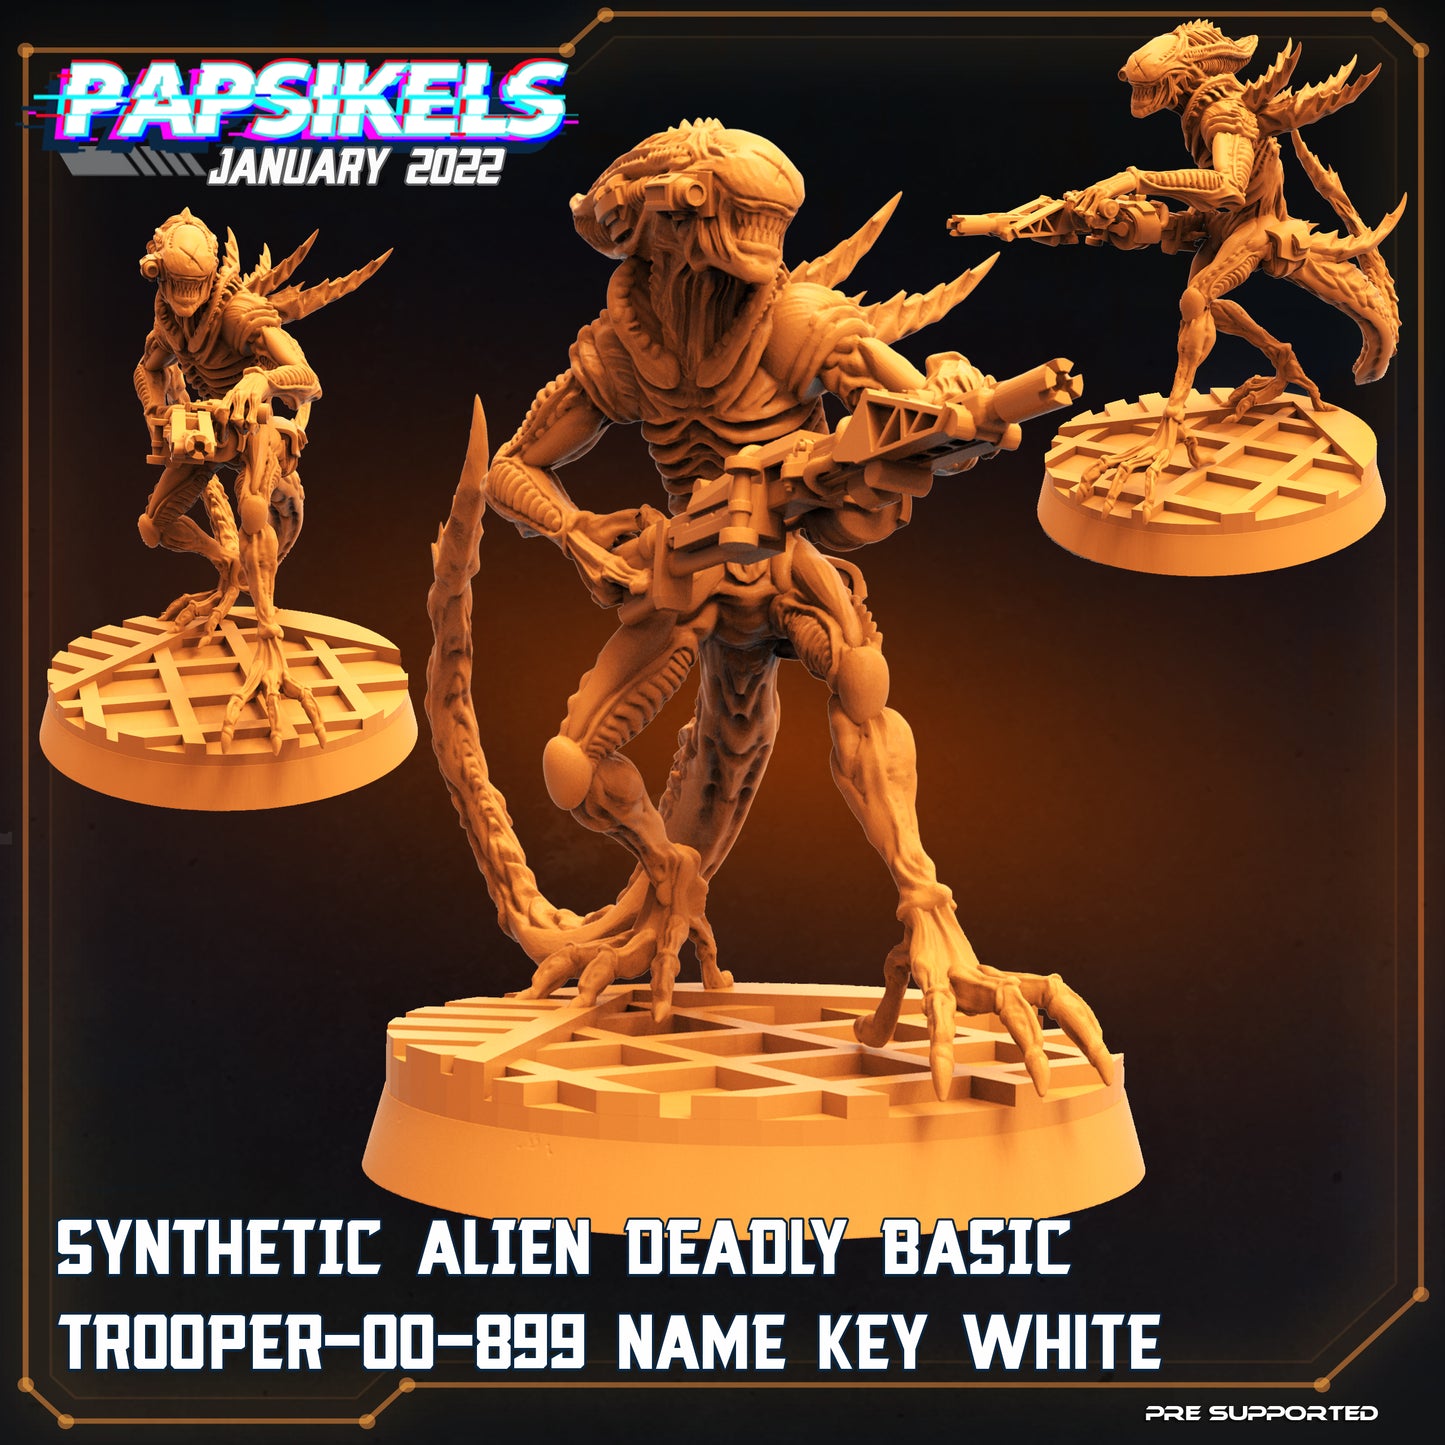 Synthetic Alien Deadly Basic Troop (9 variantes)